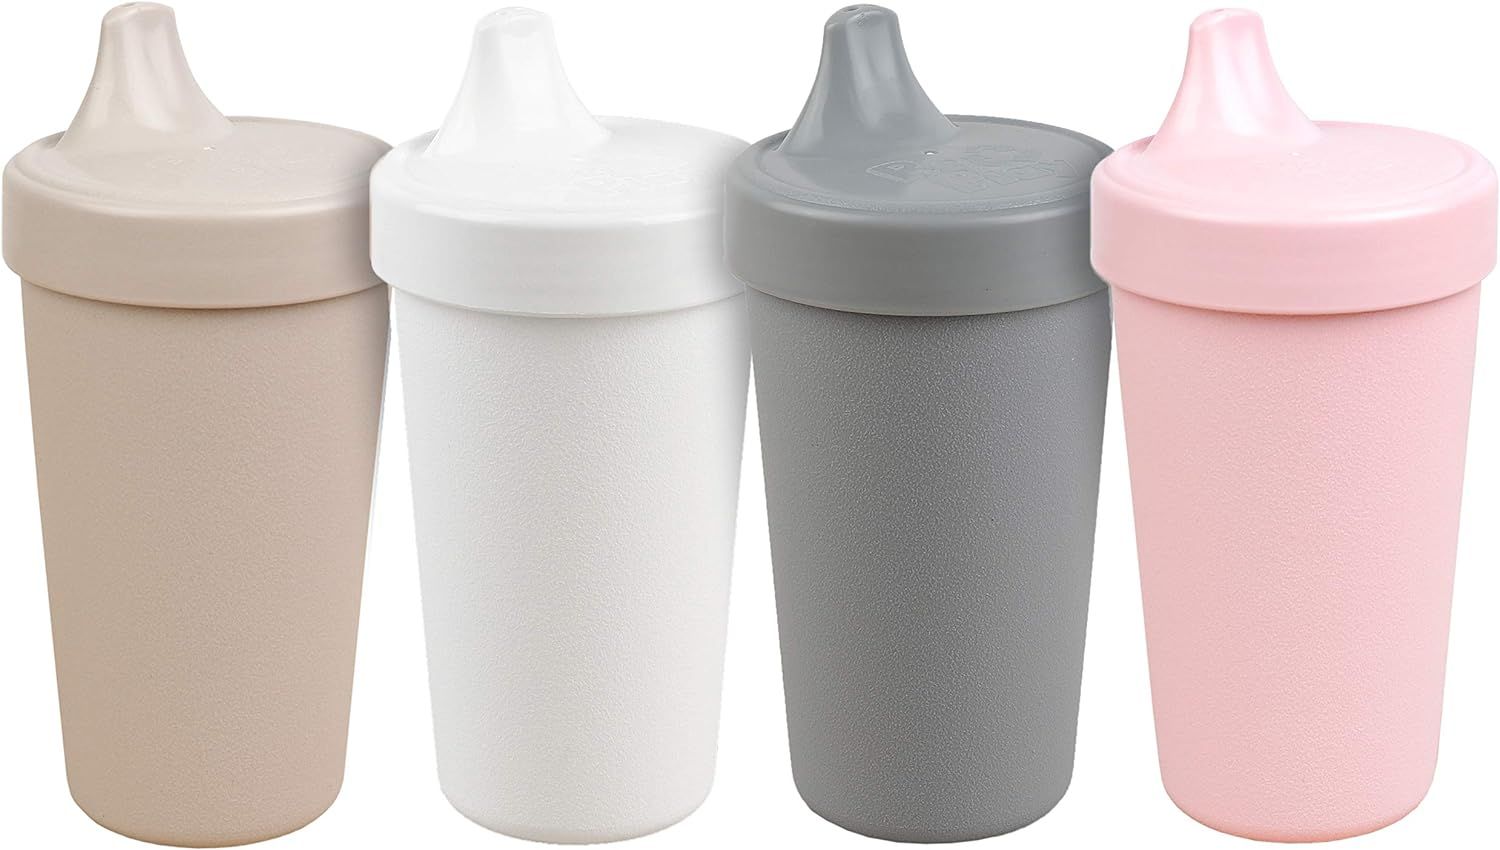 RE-PLAY 4pk - 10 oz. No Spill Sippy Cups for Baby, Toddler, and Child Feeding in Ice Pink, Sand, ... | Amazon (US)